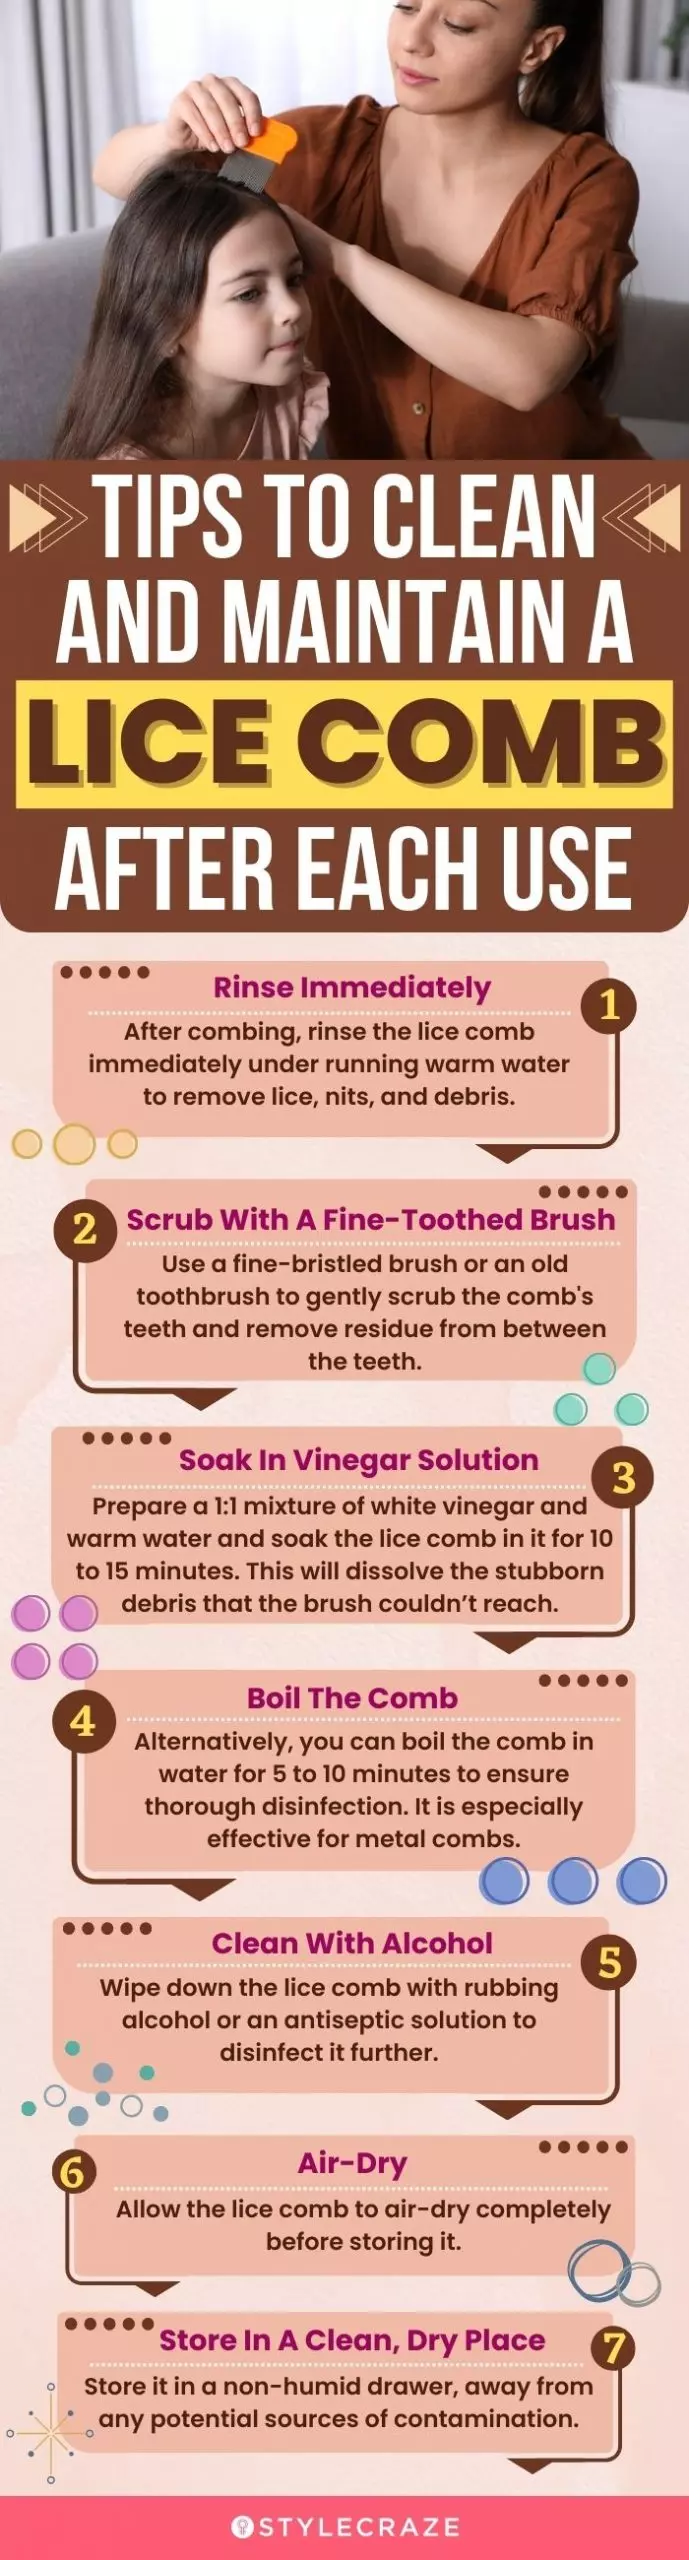 Tips To Clean And Maintain A Lice Comb After Each Use (infographic)